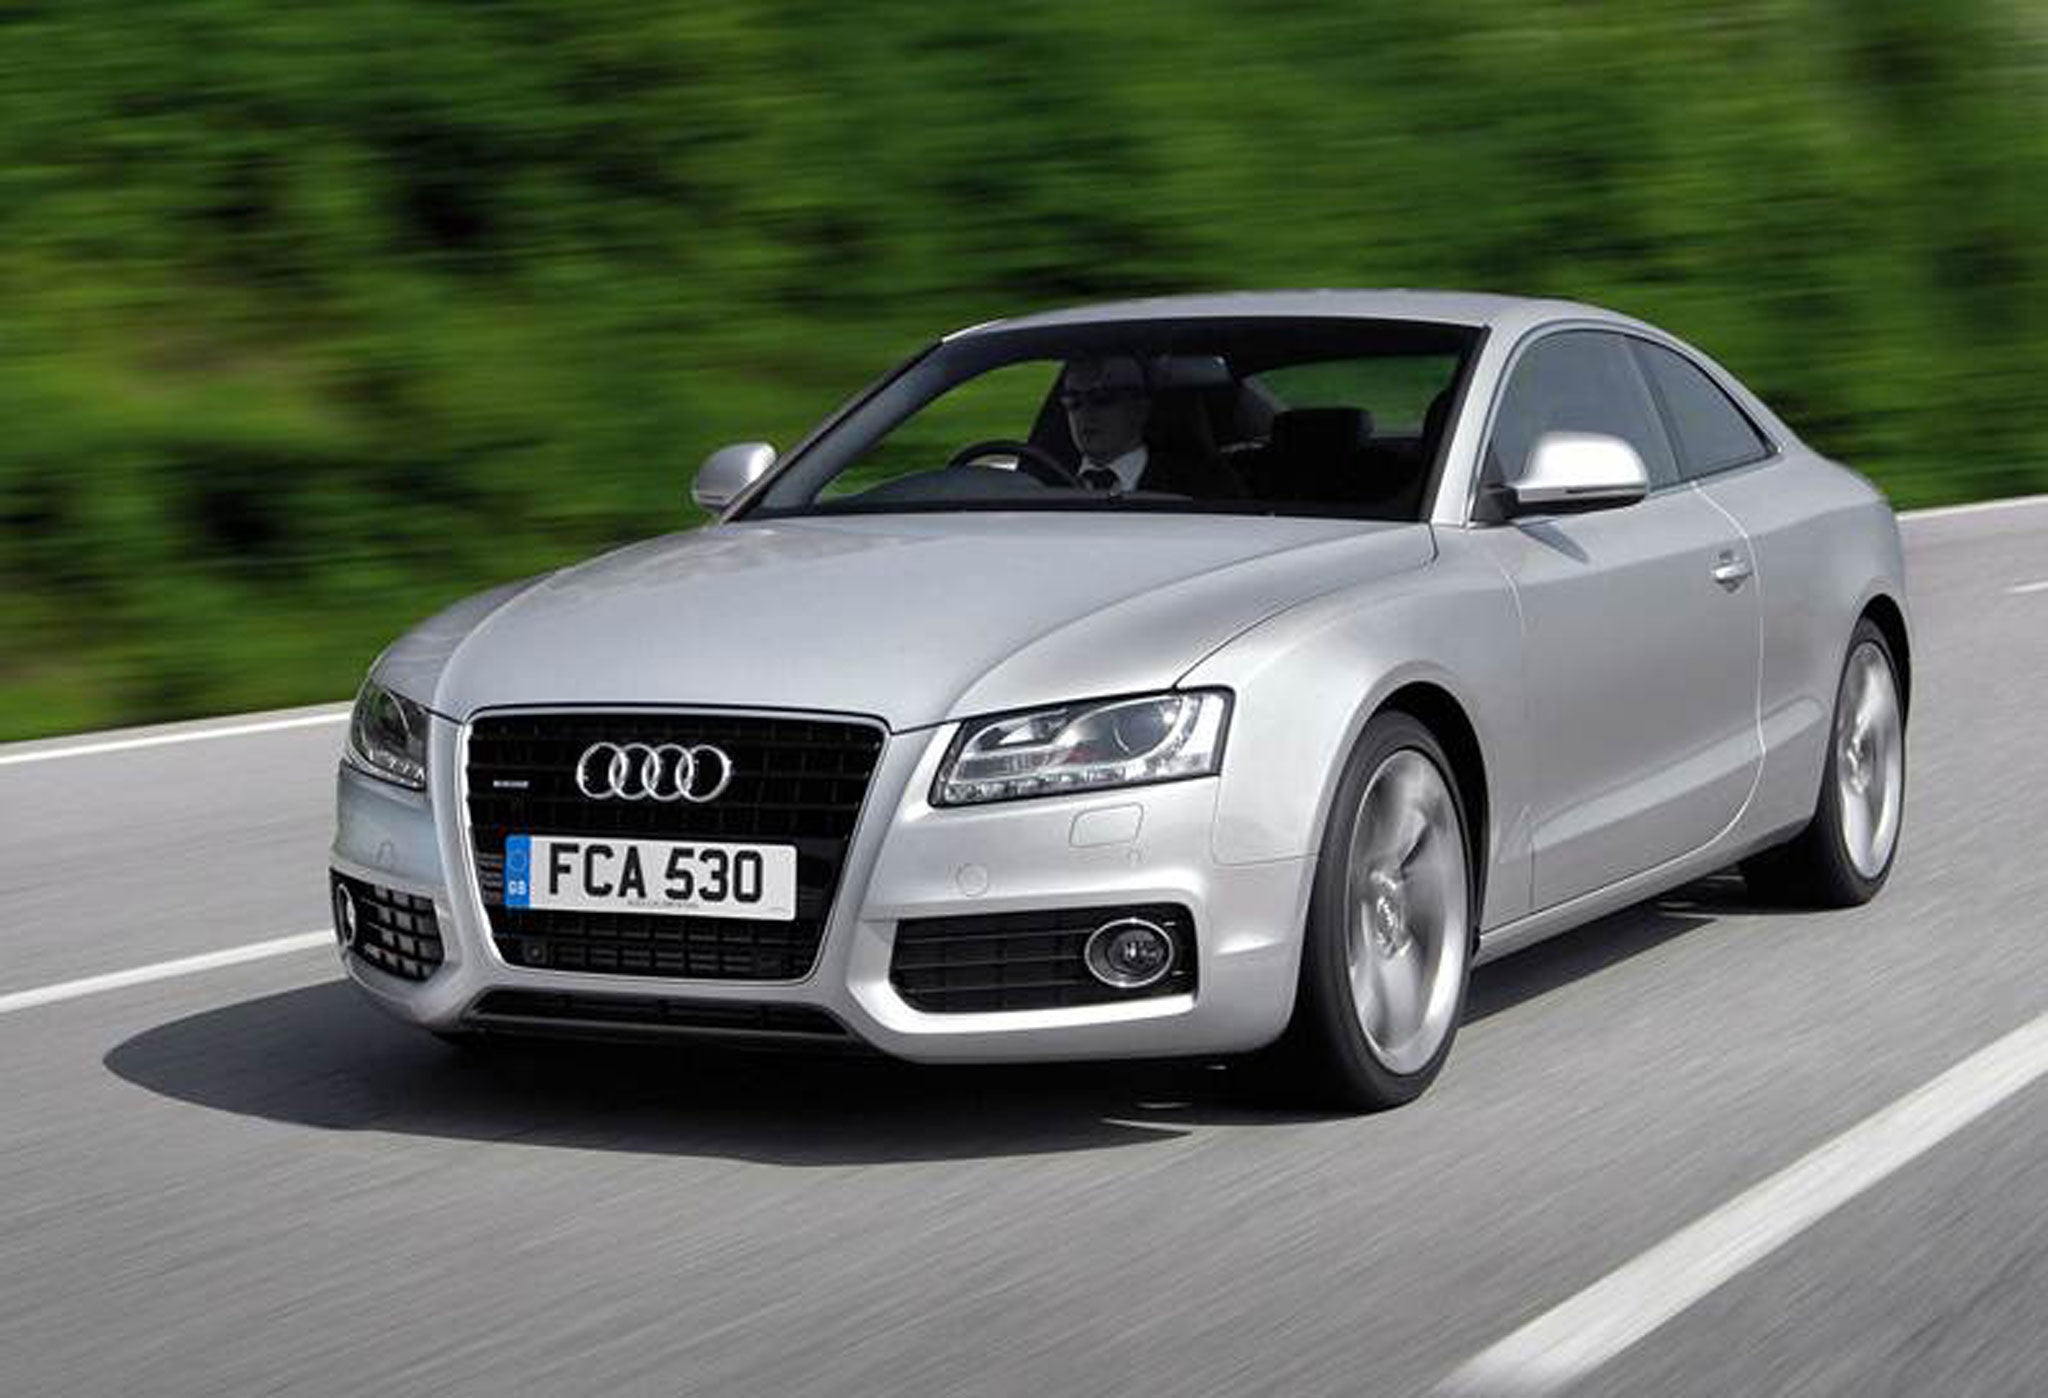 A petrol engine would be far better for a budget Audi A5 buyer